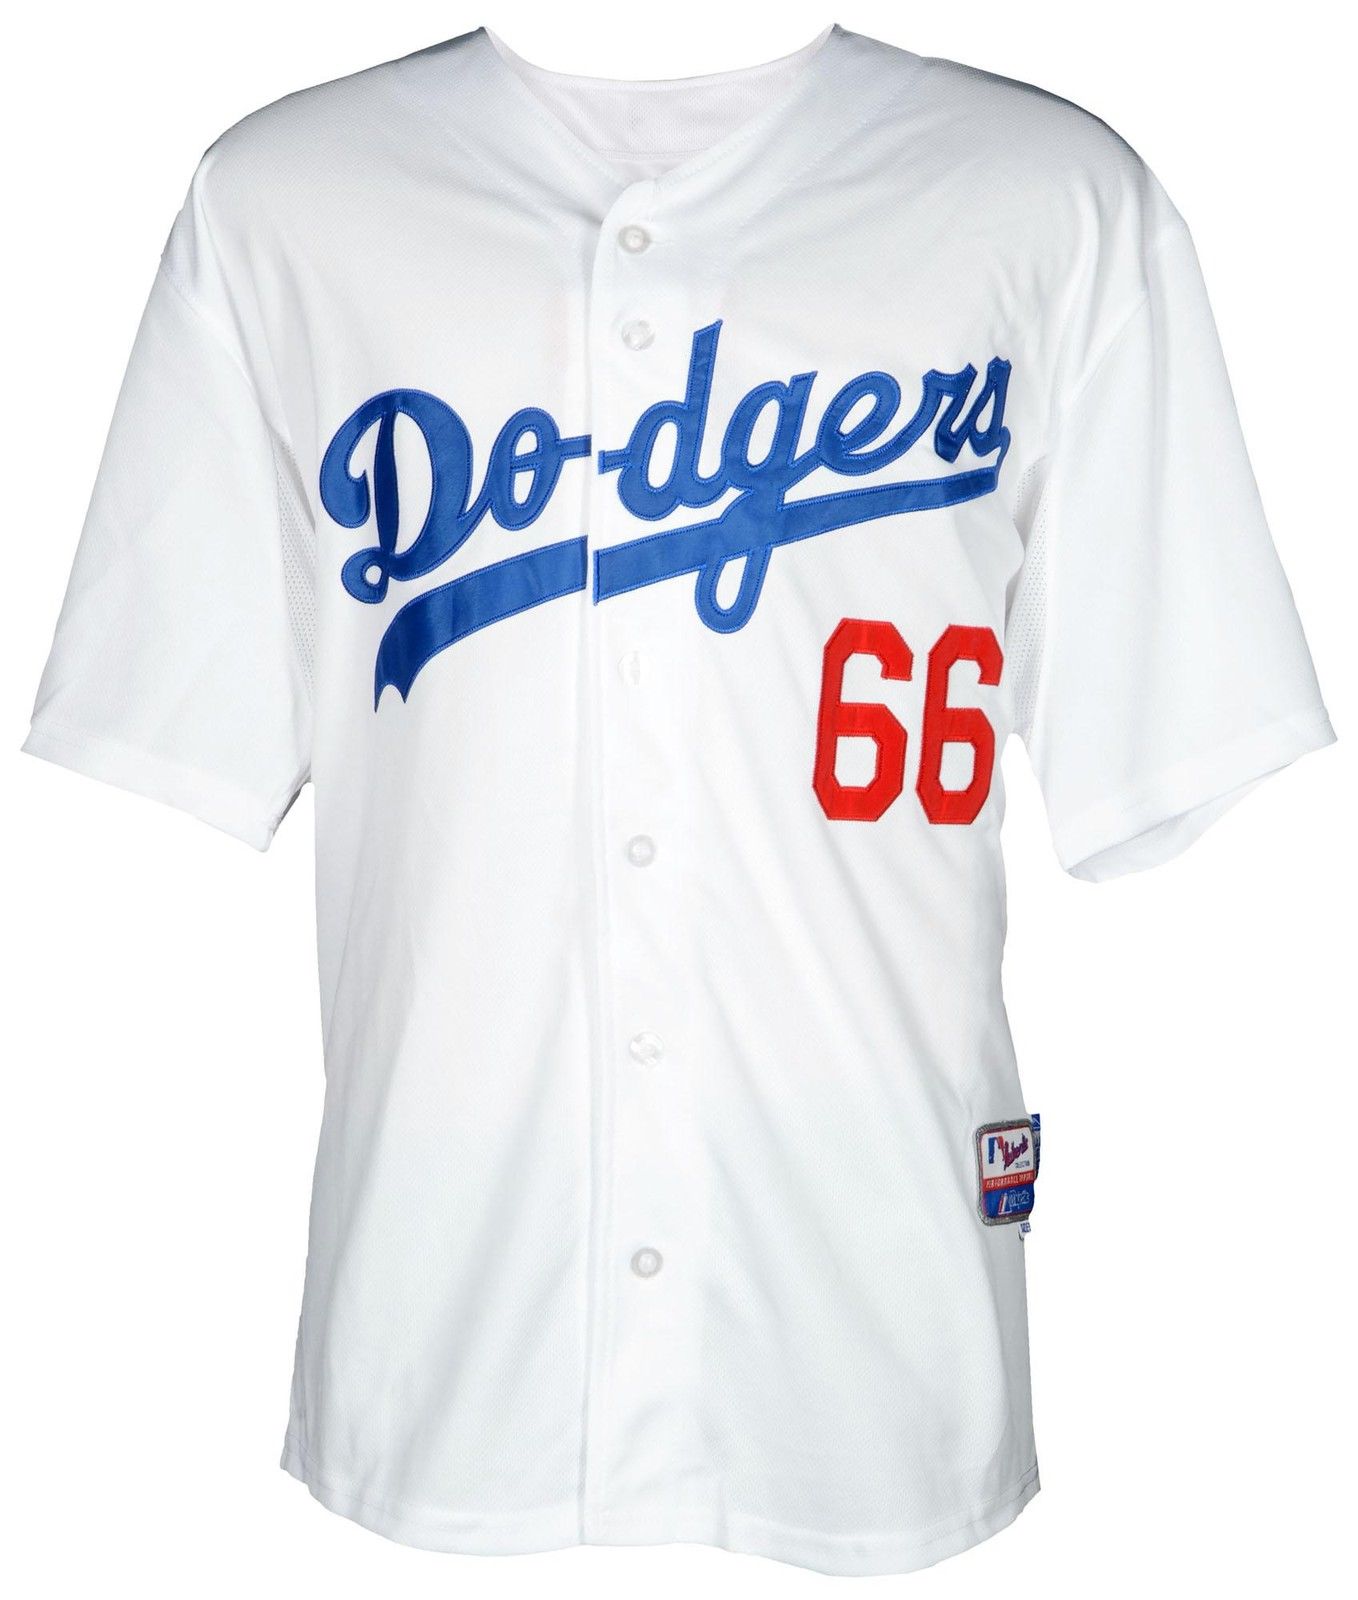 Yasiel Puig Autographed Game Used Los Angeles Dodgers Jersey (MLB)